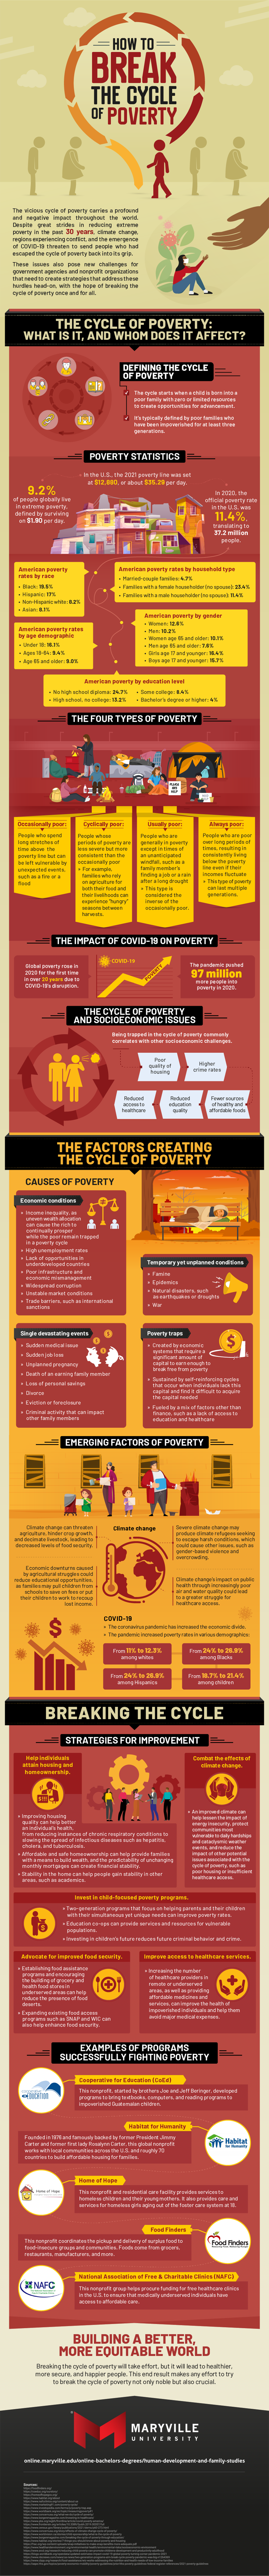 What the cycle of poverty is and how to break it.